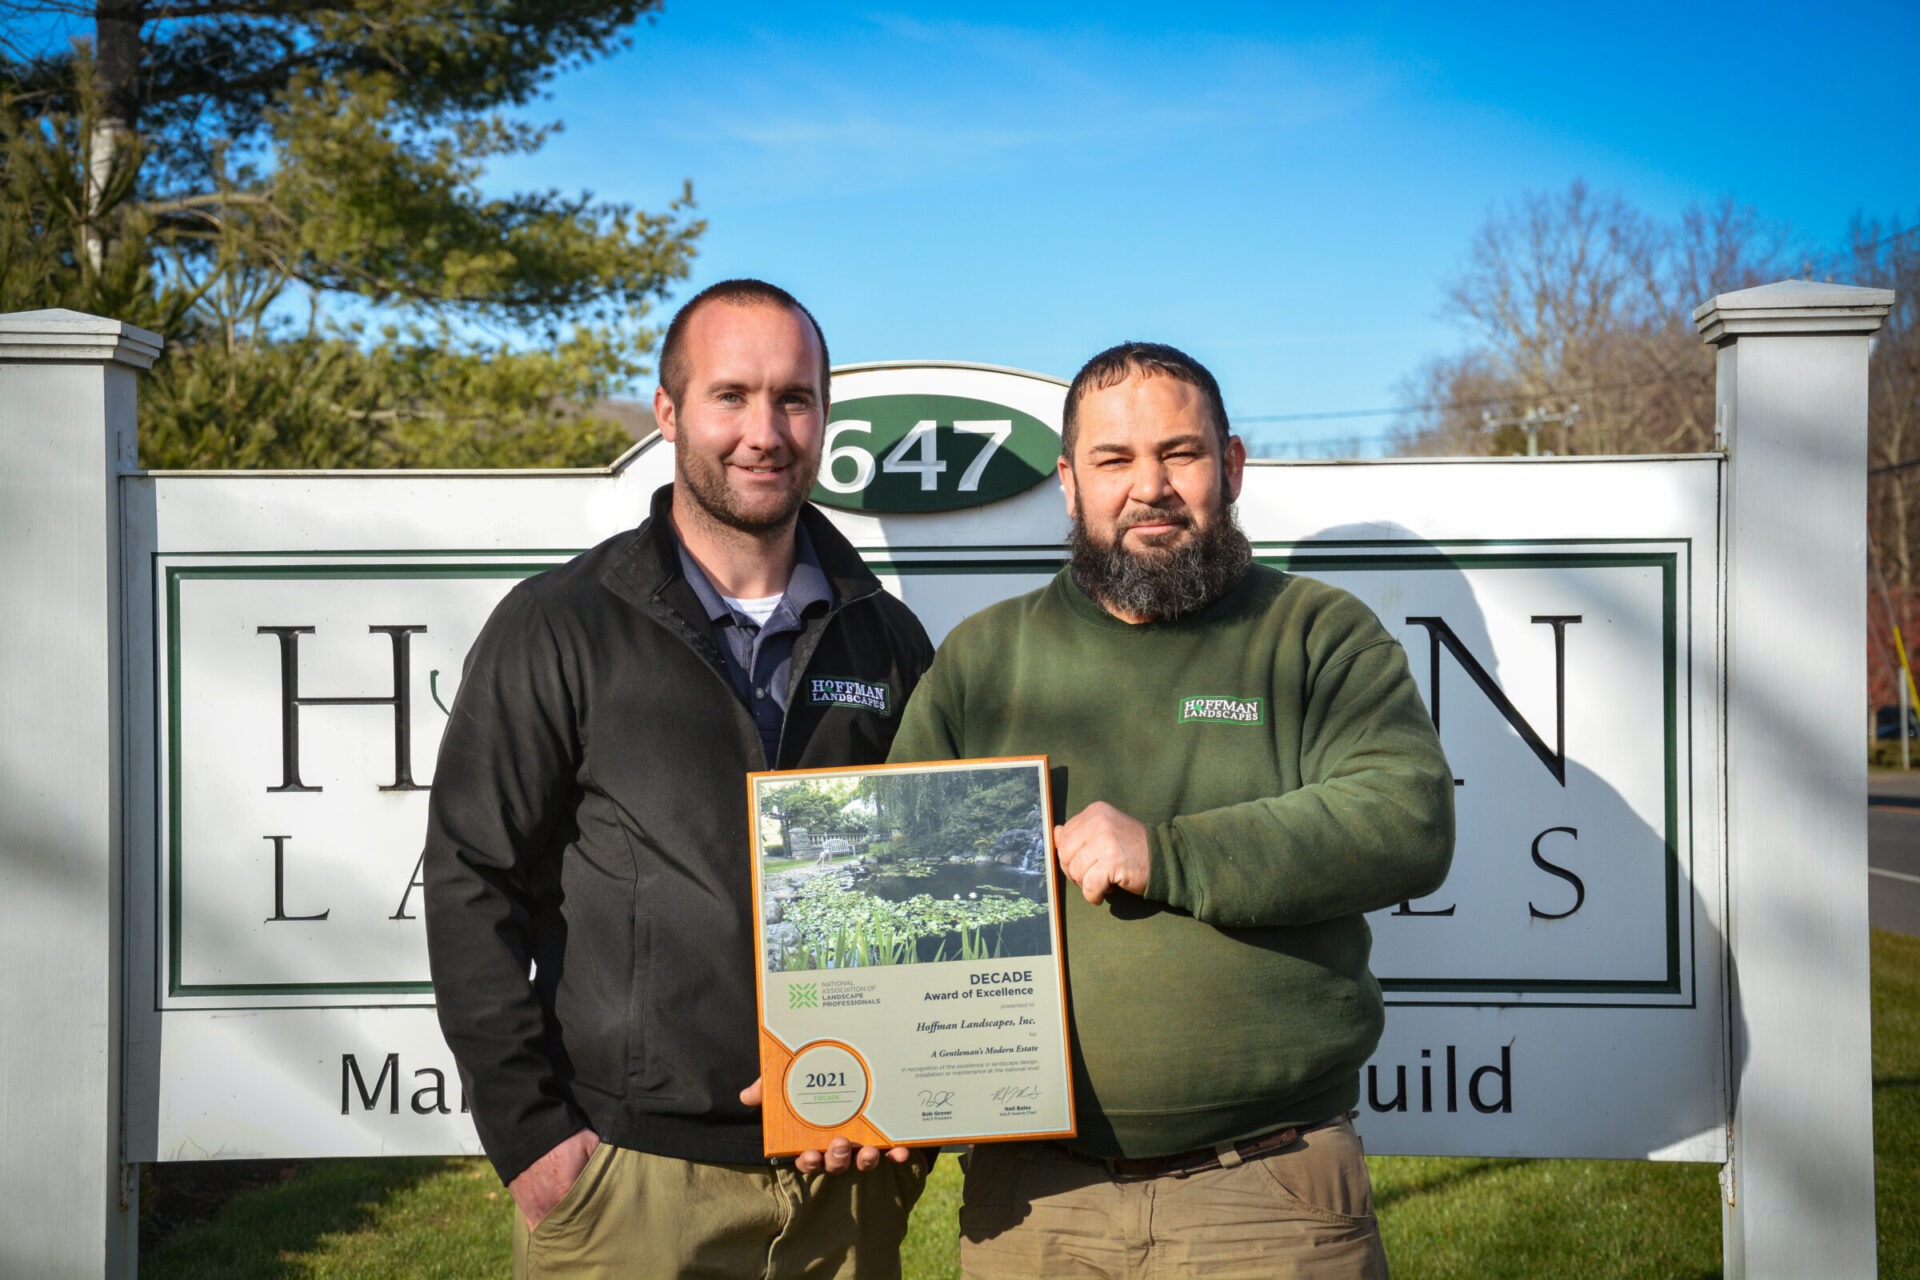 Two persons are standing in front of a sign labeled "Hoffman Landscapes," holding an award for excellence dated 2021. It is a sunny day.